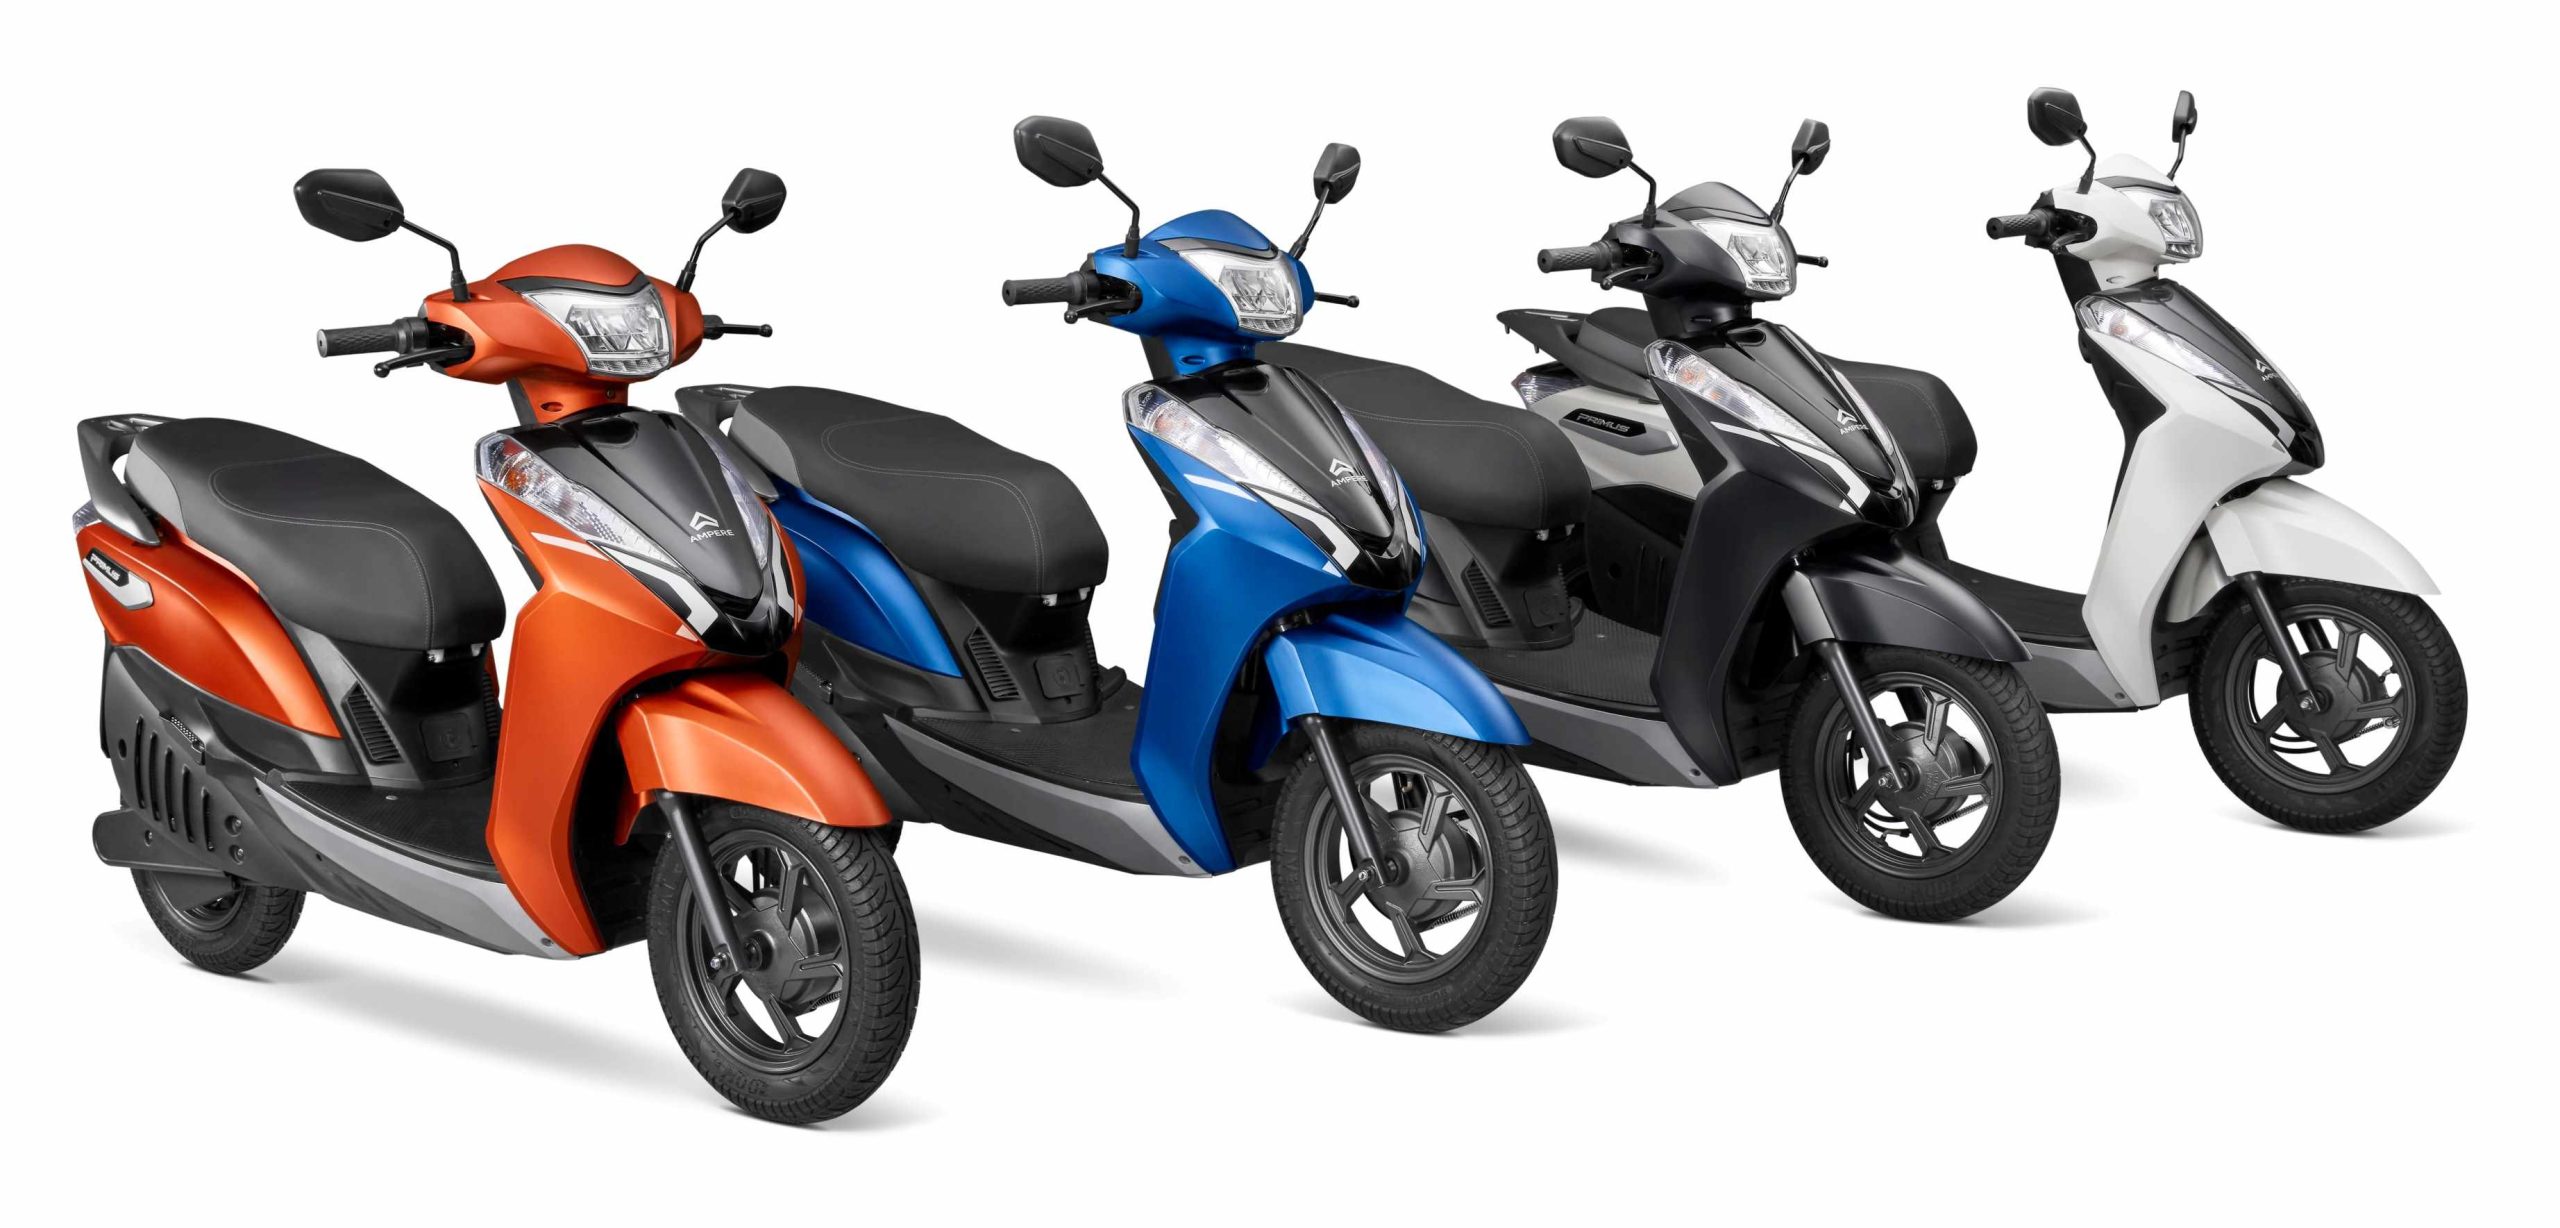 Ampere electric two-wheeler registers over 1 lakh retail sales in the Financial year 2022-23